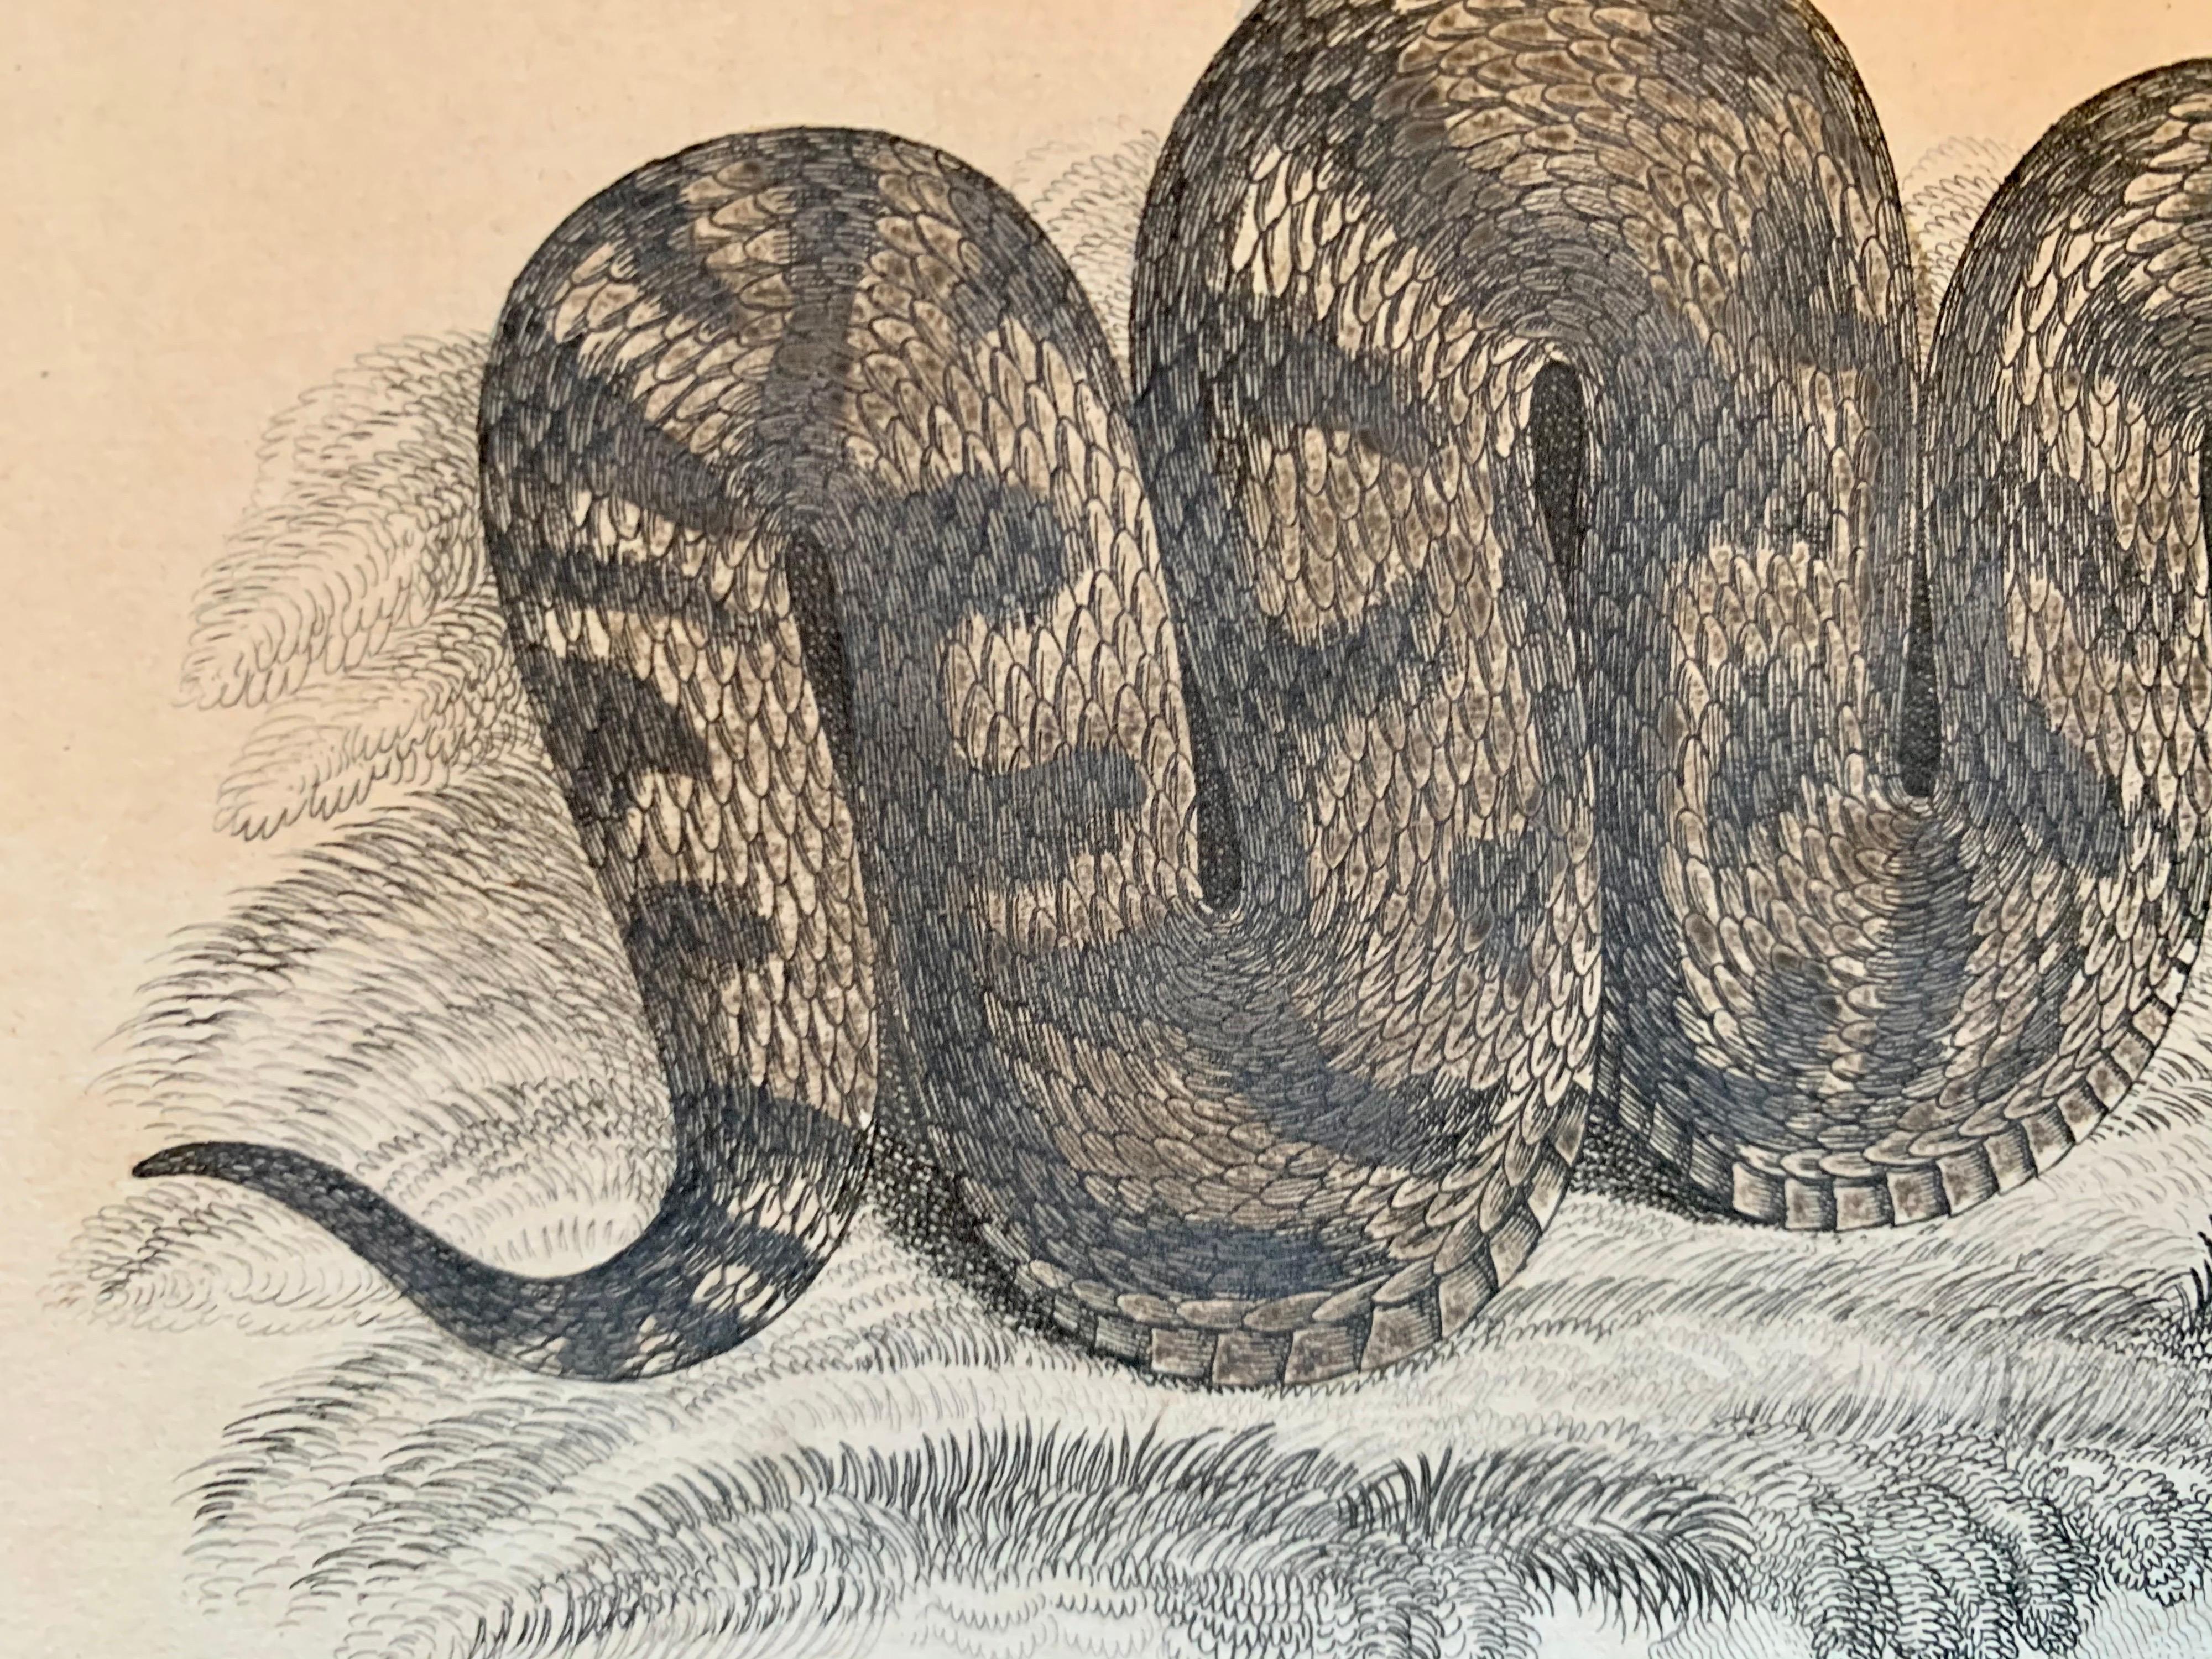 2 Hand colored prints depicting snakes and chameleon. Very beautifully made. Published in 1840 based on the work of Scottish naturalist, Sir William Jardine, 7th Baronet. 

From 